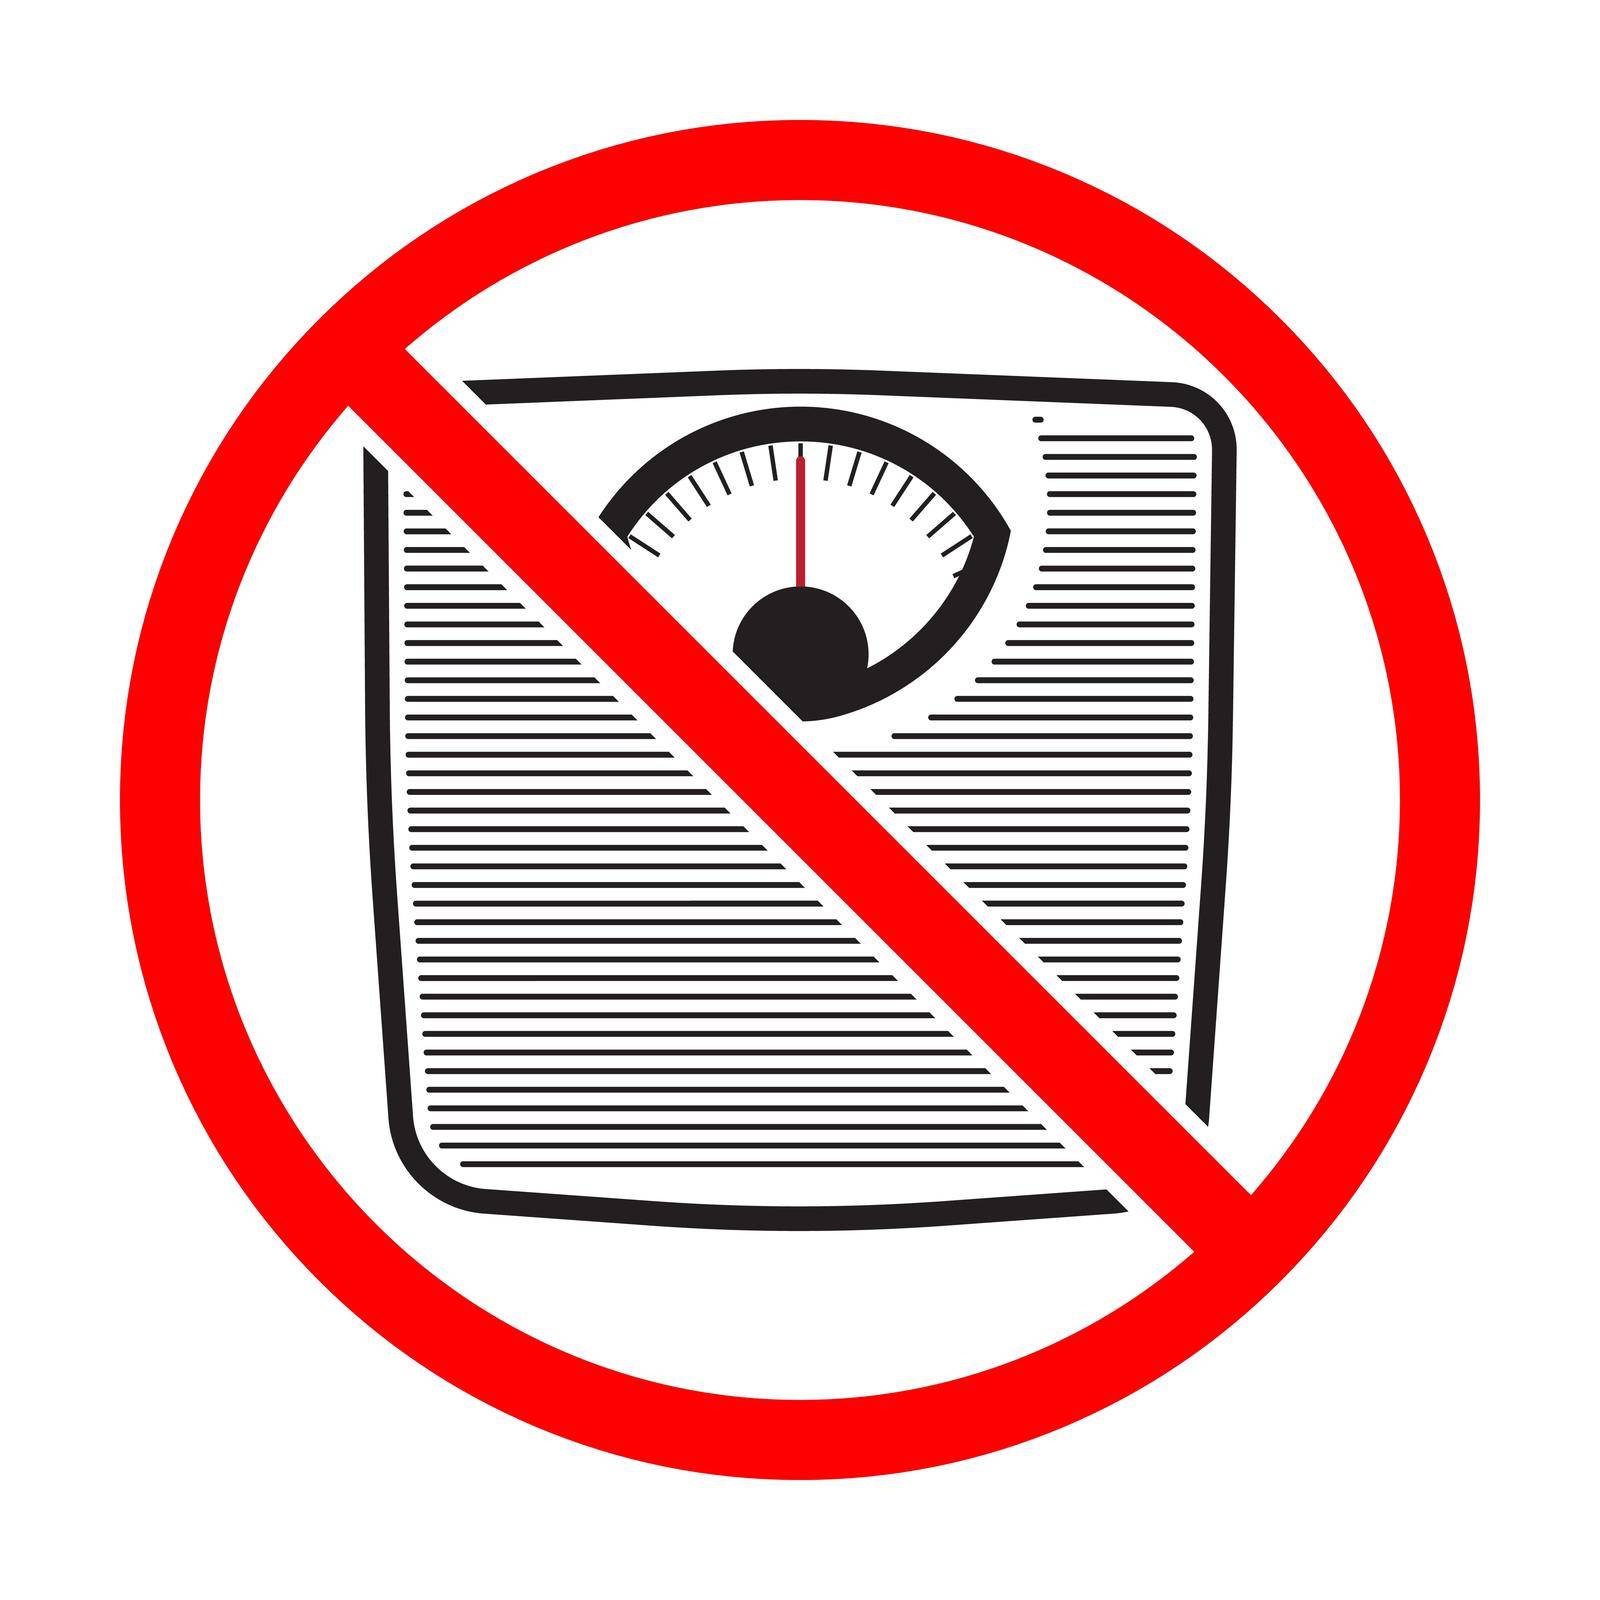 Weighing scale ban sign. Weighing scale is forbidden. Prohibited sign of weighing scale. Red prohibition sign. Vector illustration